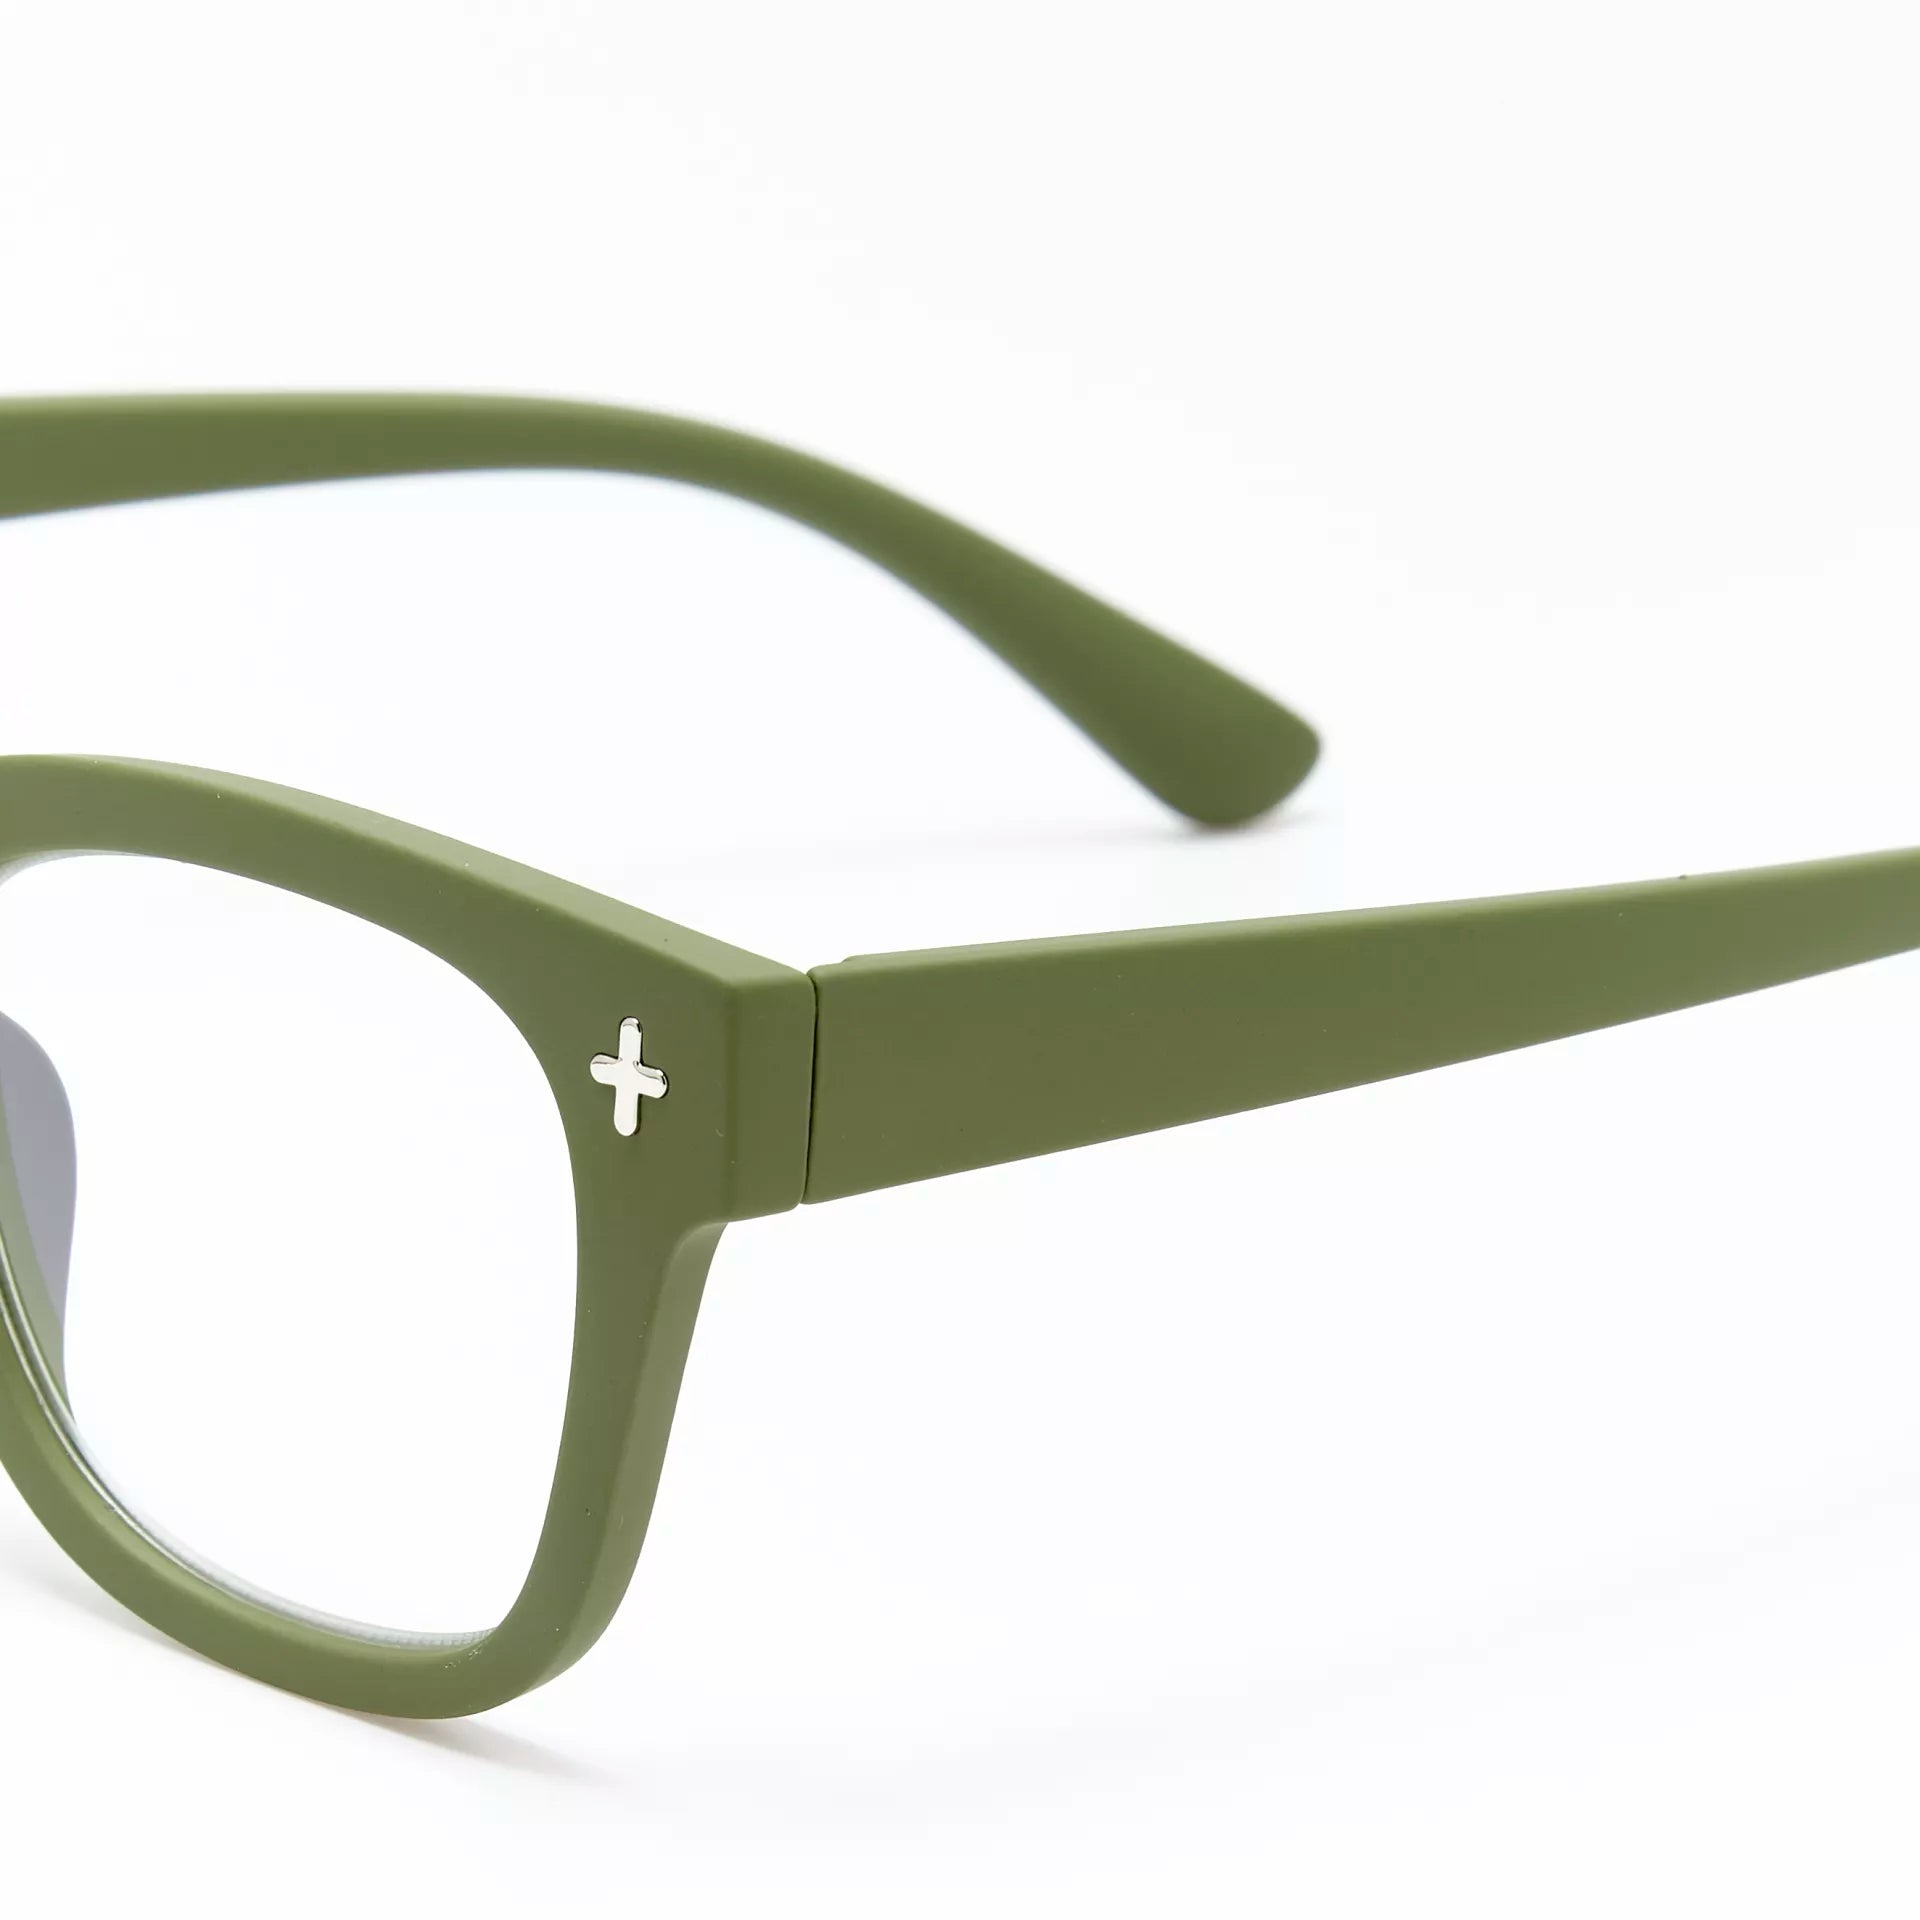 Fabulous Gifts Okkia Reading Glasses Nero Verde 2.00 by Weirs of Baggot Street